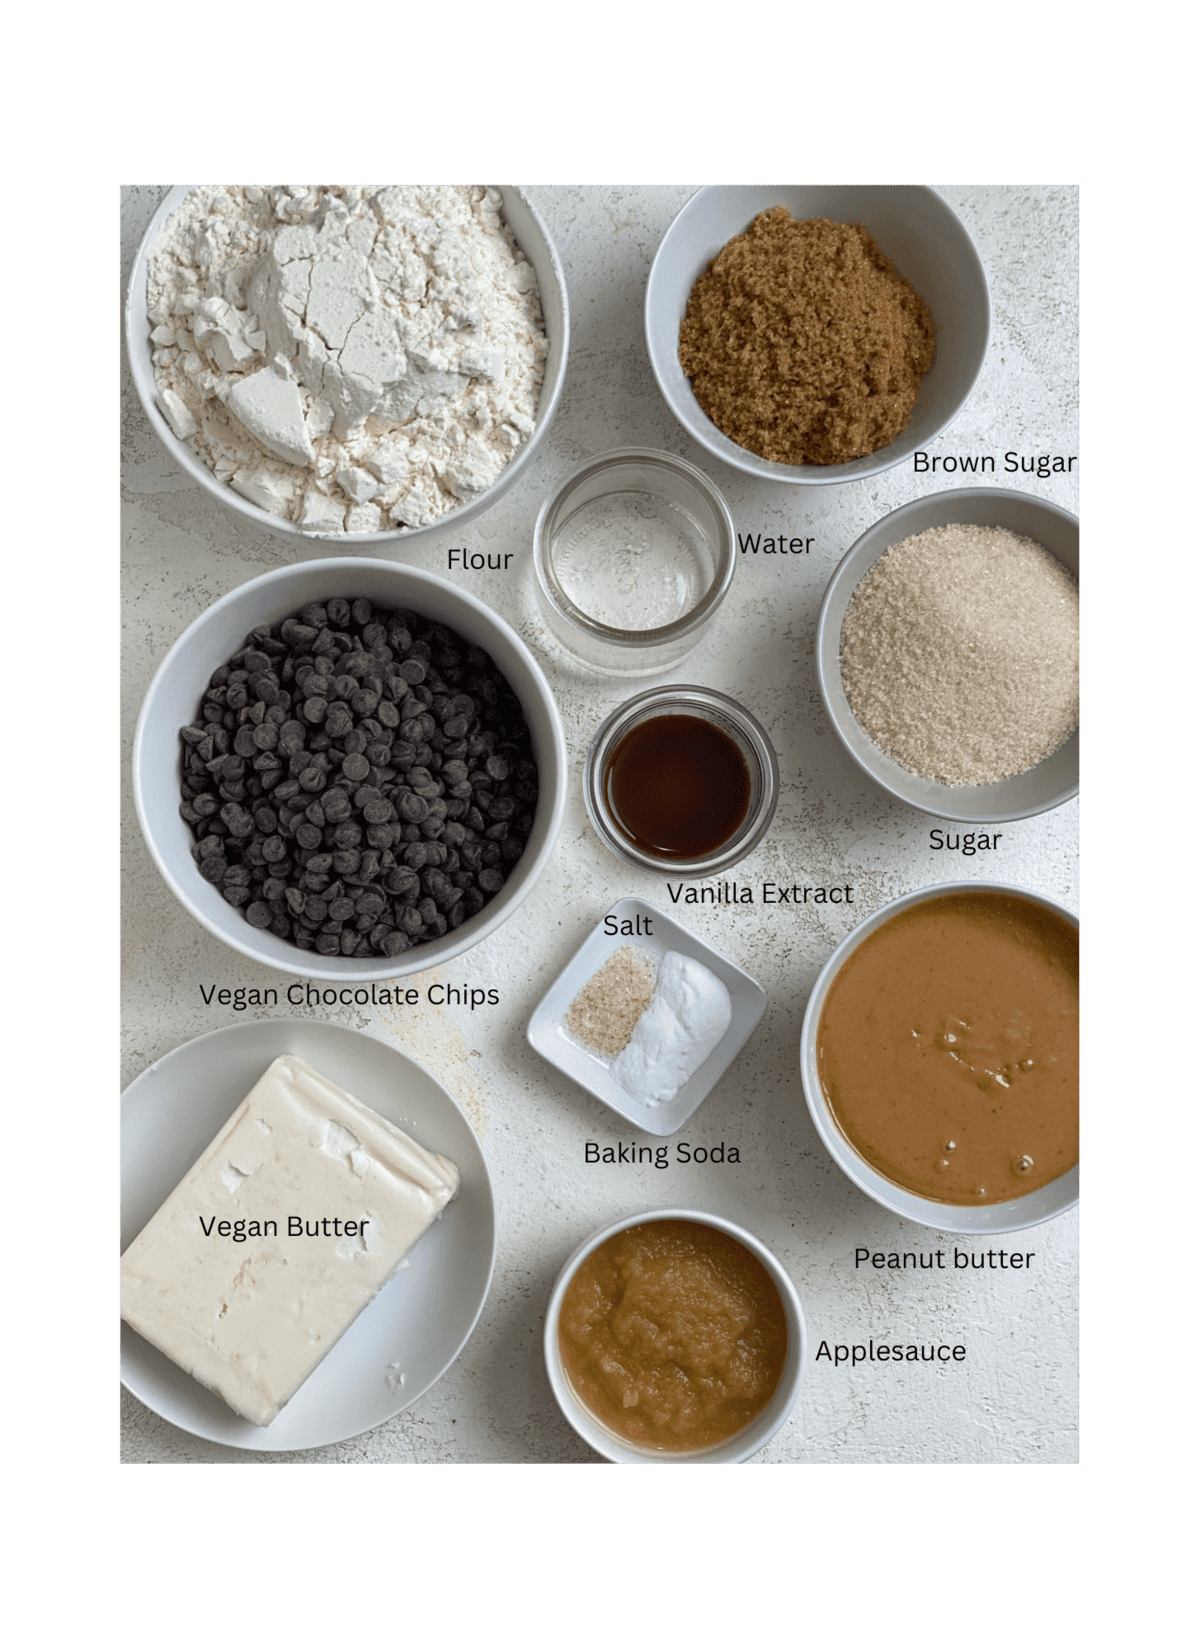 ingredients for Edible Peanut Butter Cookie Dough measured out against a white surface